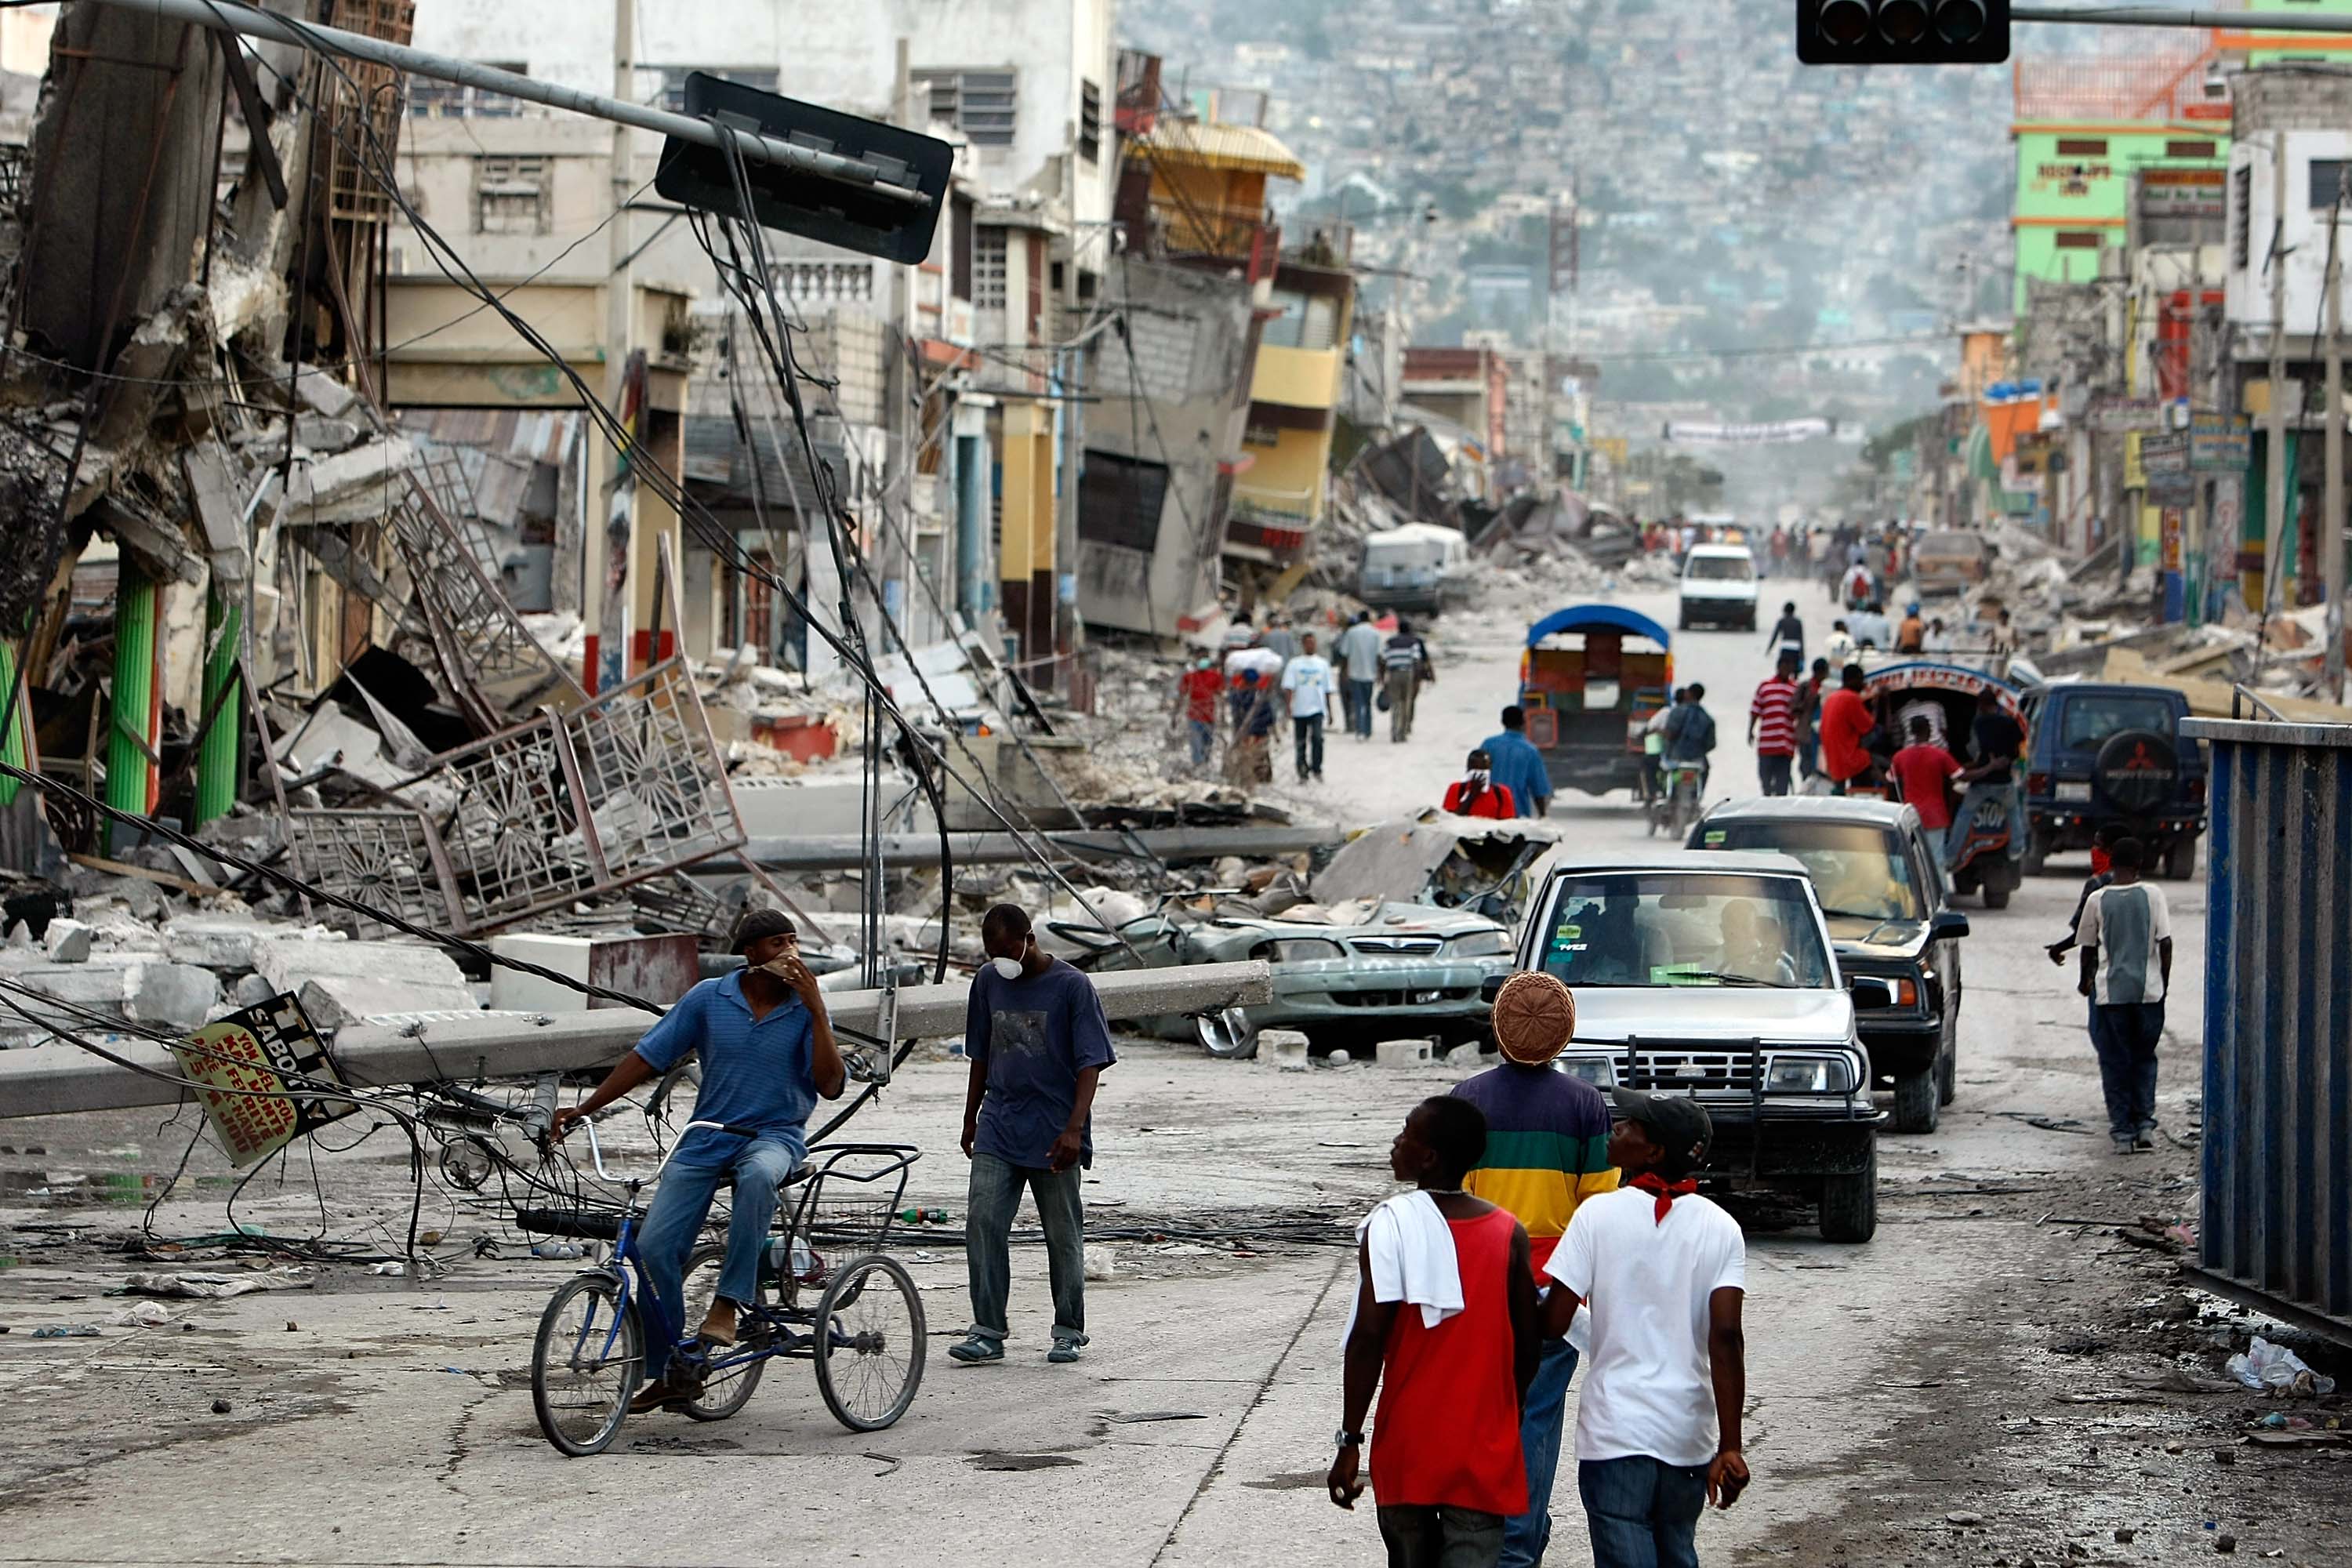 Destroyed buildings are seen after the massive earthquake Jon 16, 2010 in Port-au-Prince, Haiti. (Joe Raedle&mdash;Getty Images)